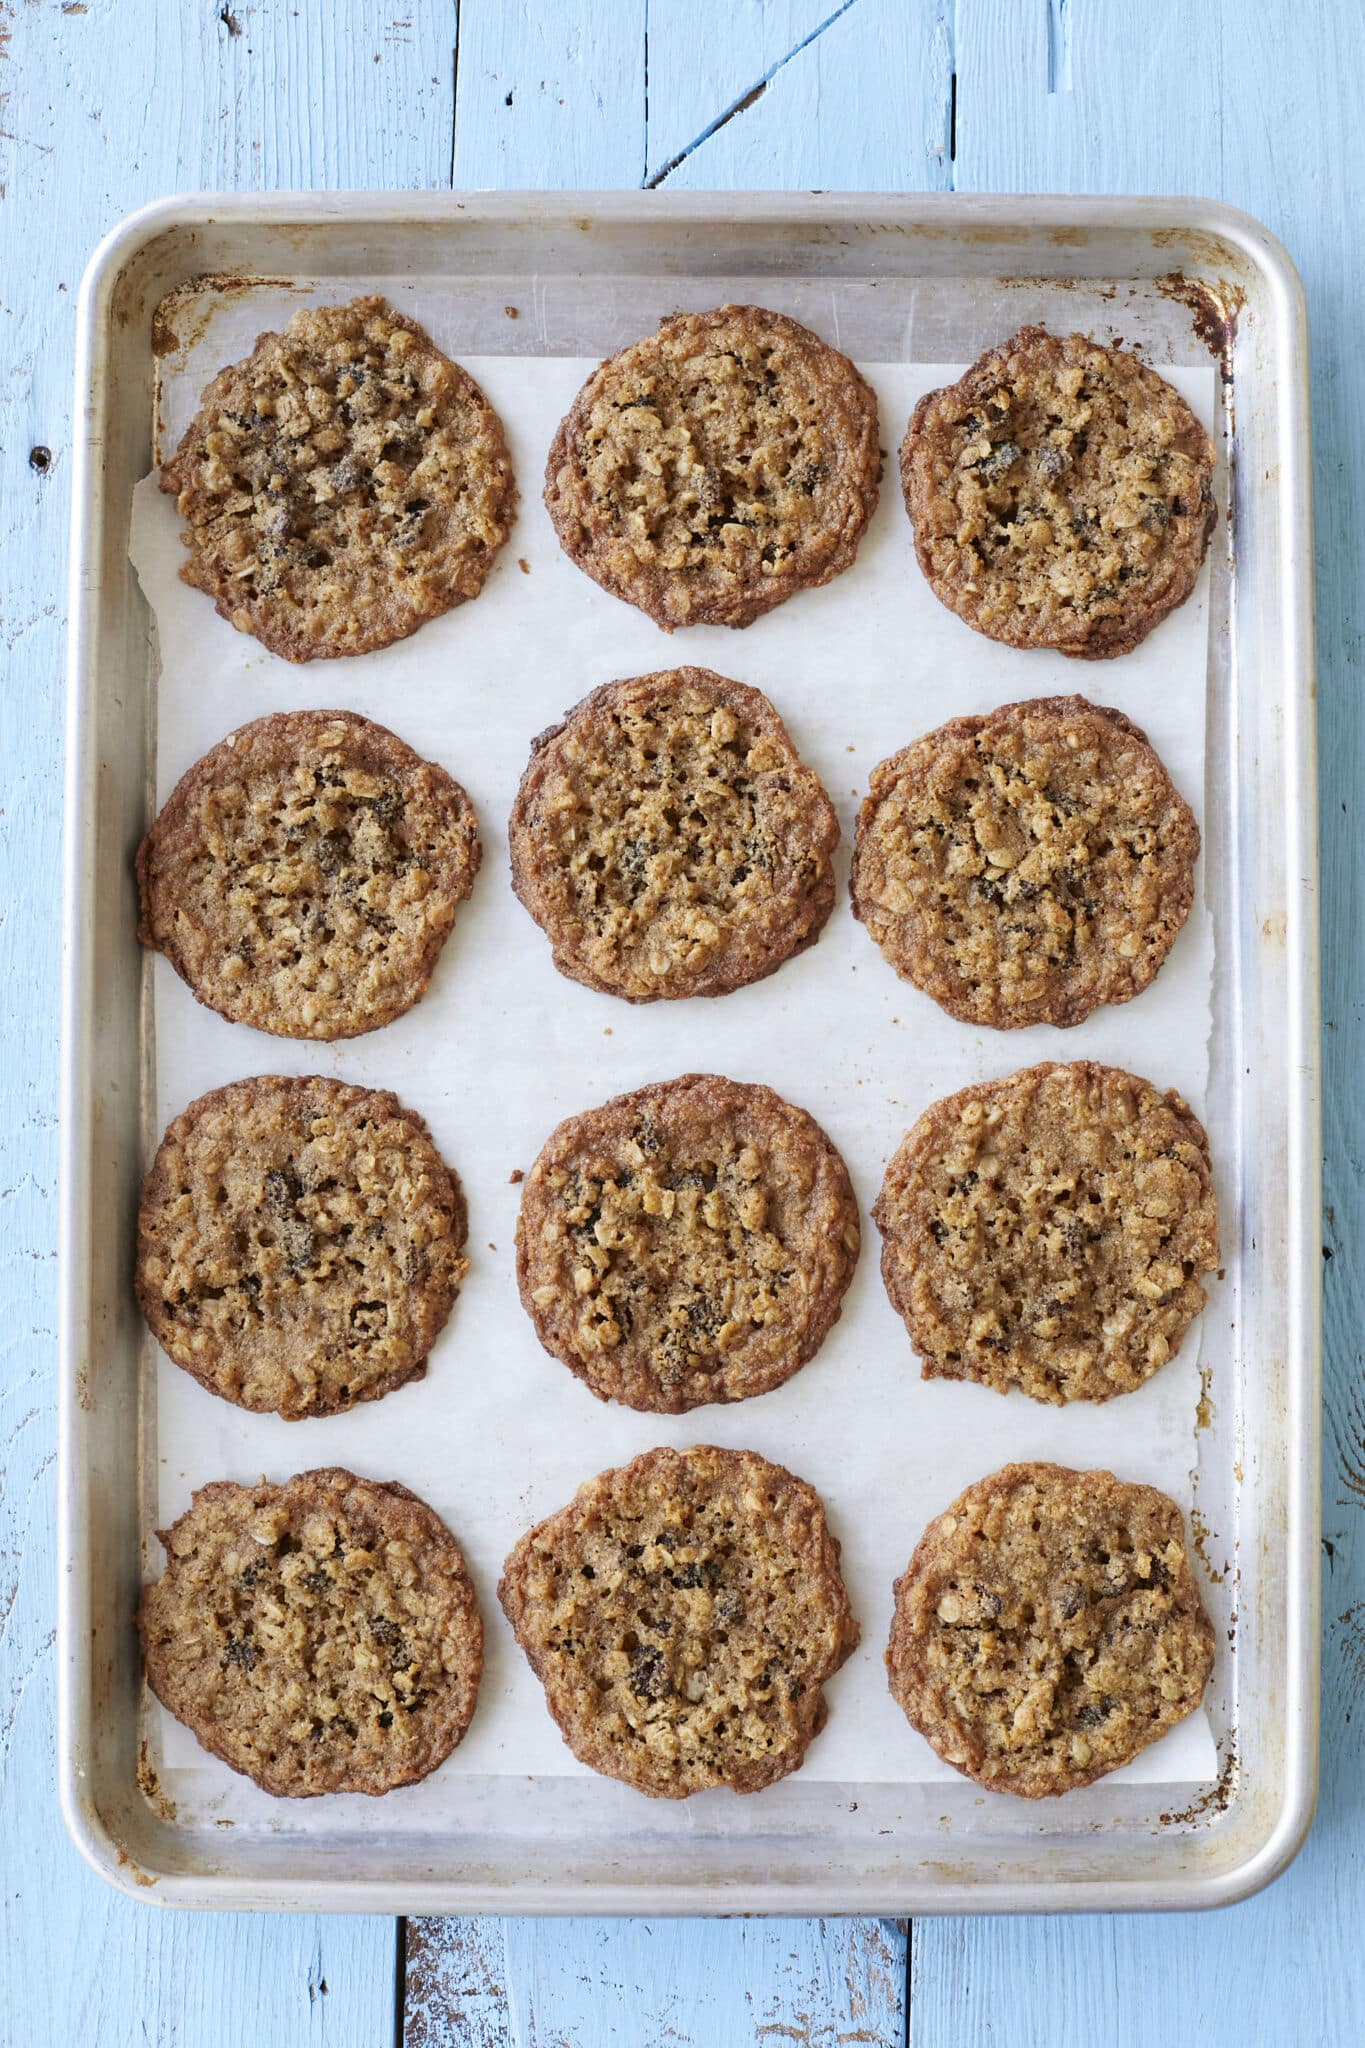 A baking tray of Almond Flour Cinnamon Raisin Cookies with golden brown colors and chewy, crispy edges. 